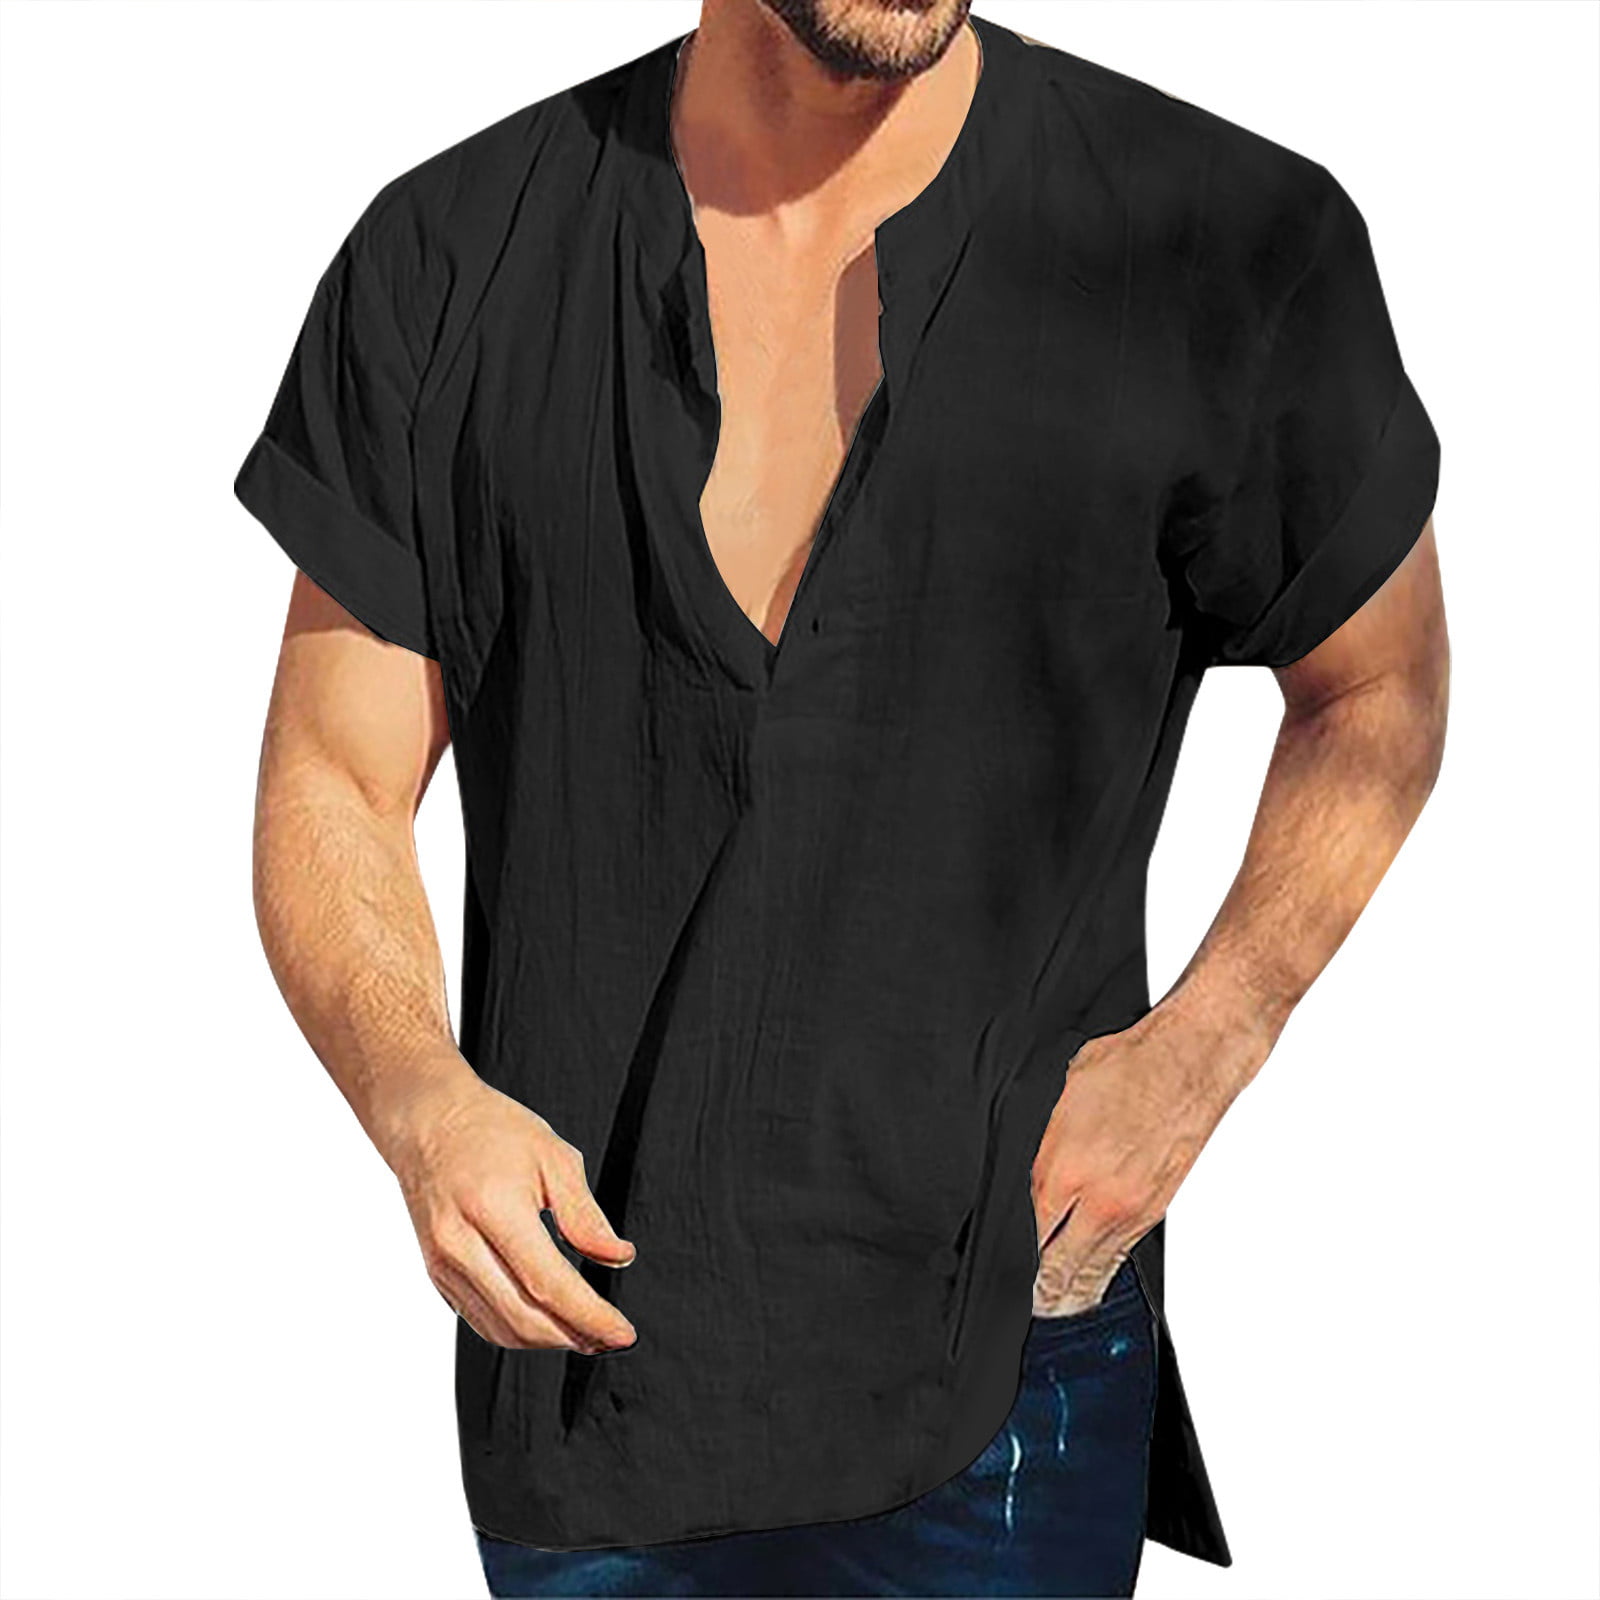 Men's Leaf Printed Big and Tall t-Shirts Short Sleeve Round Neck  Lightweight tee Shirts Summer Outdoor Casual Tops